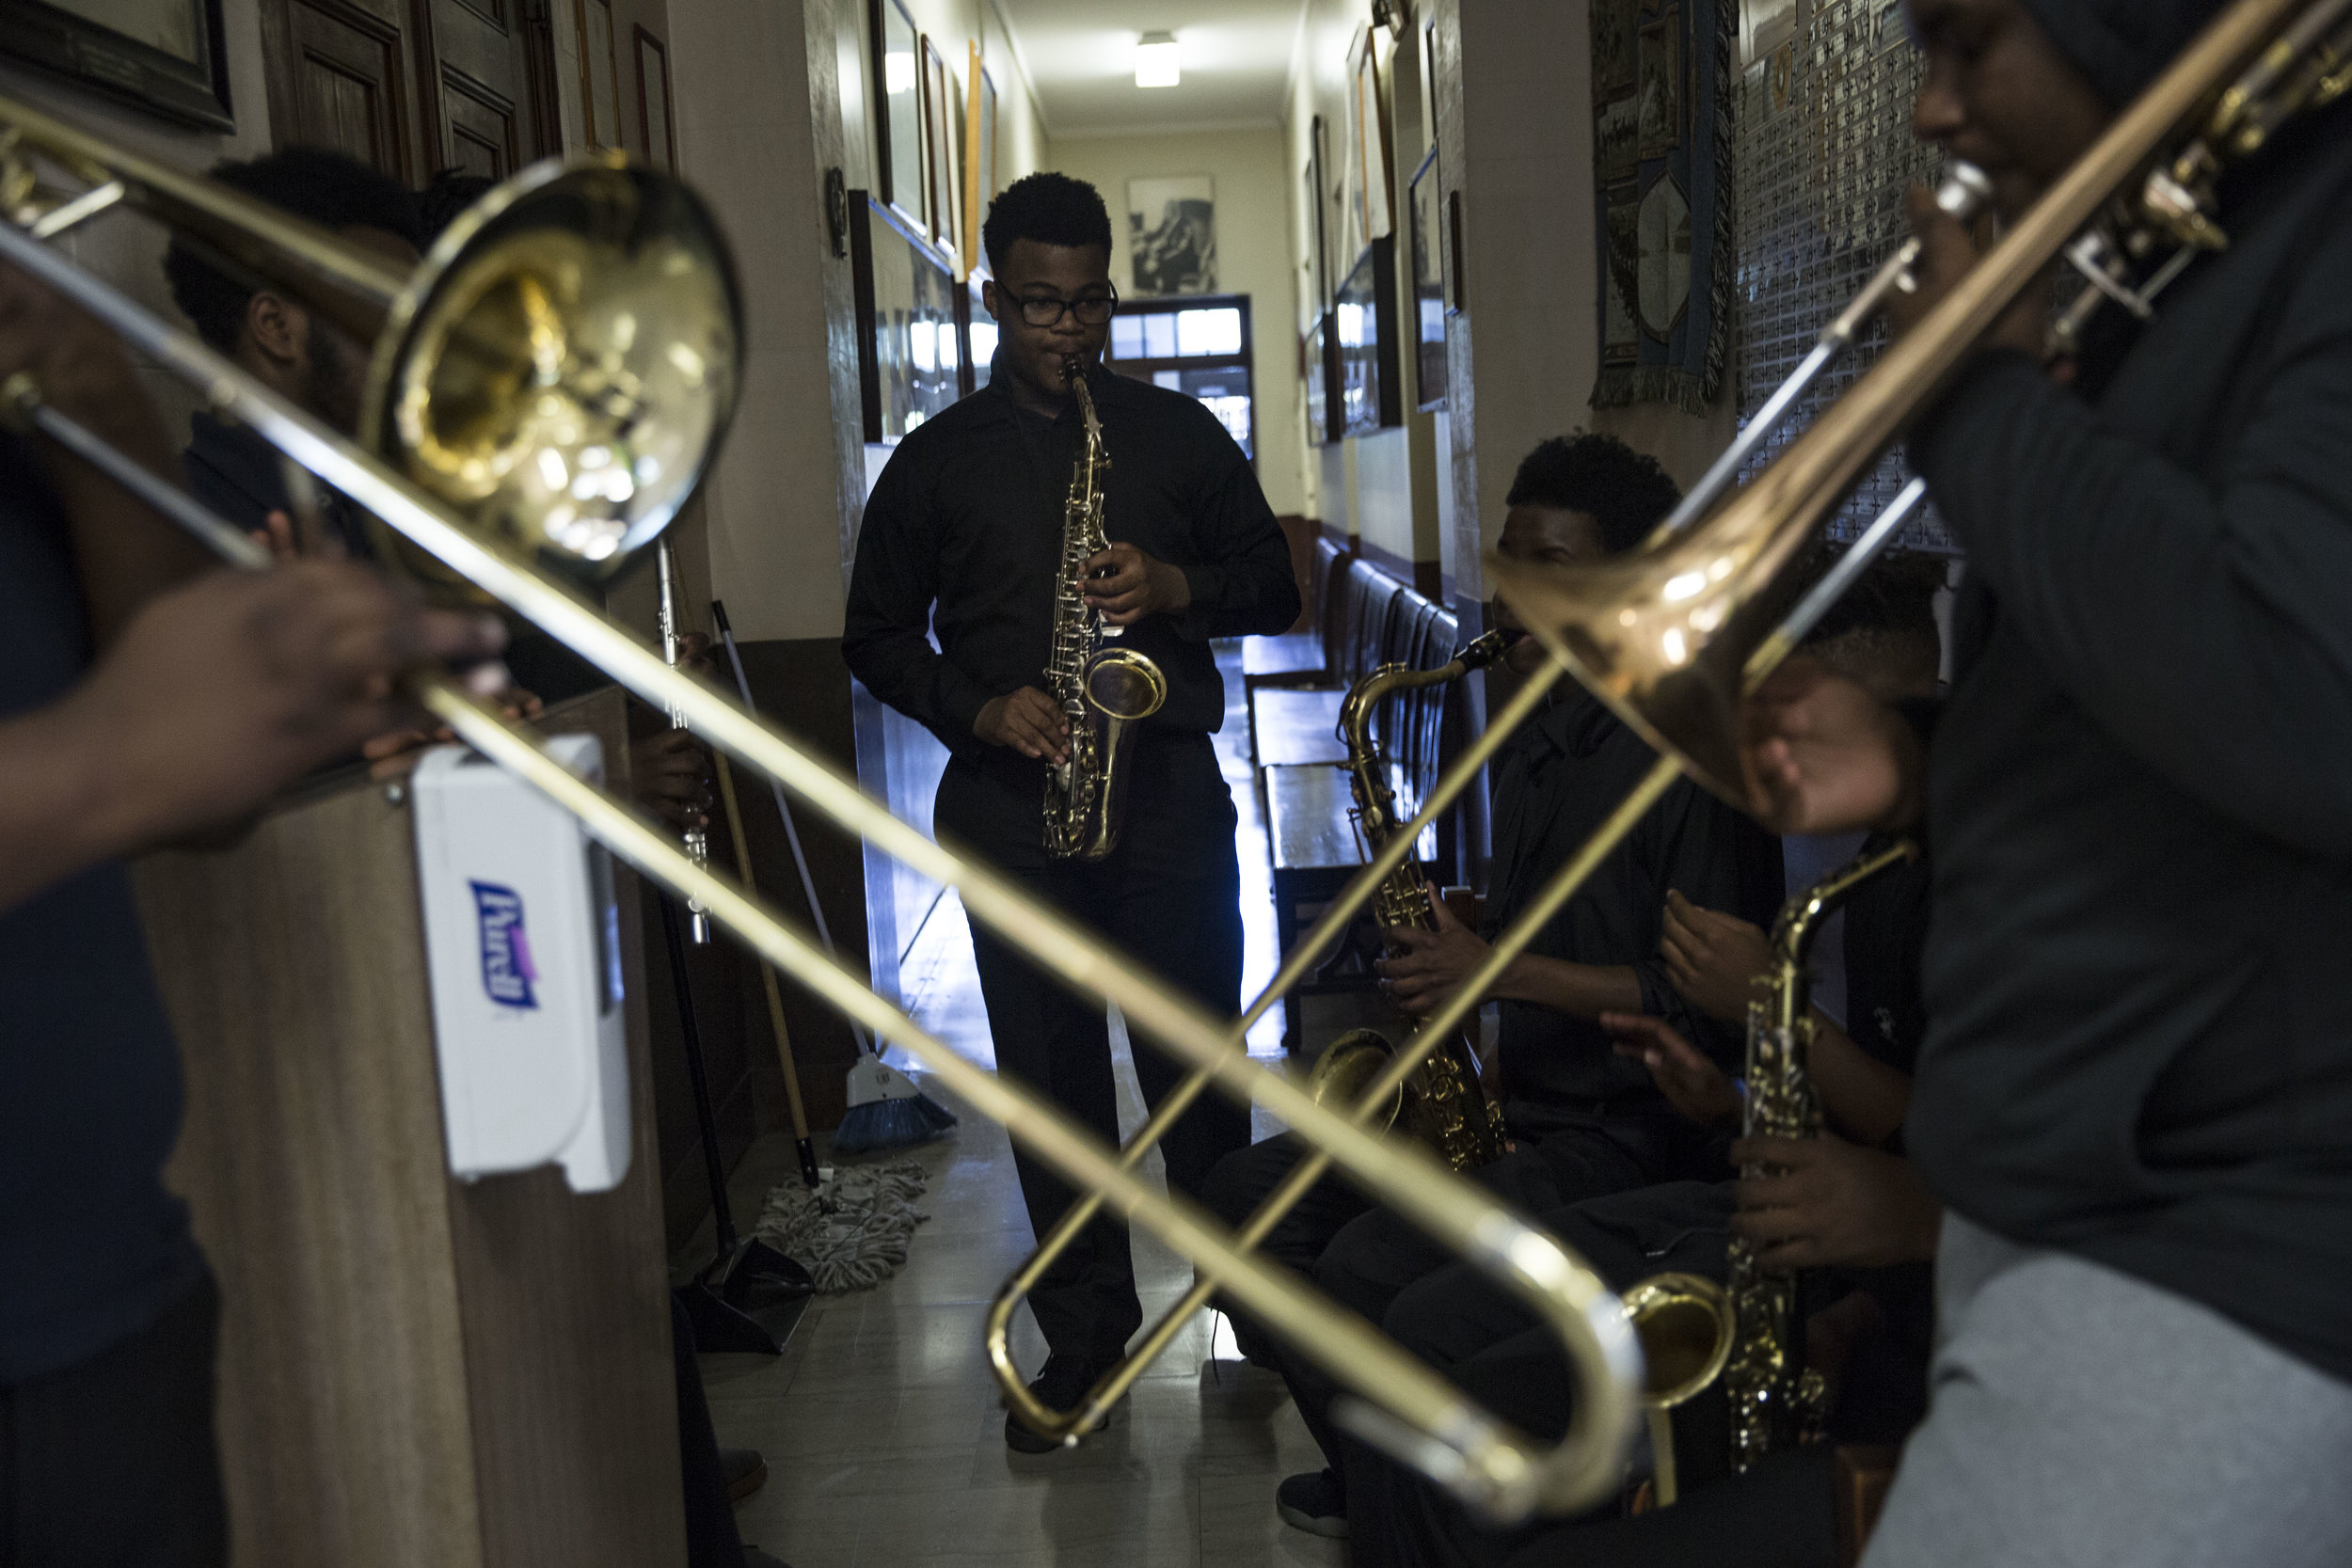   Young members of the OrchKids youth band rehearse before a concert in Baltimore, MD.  